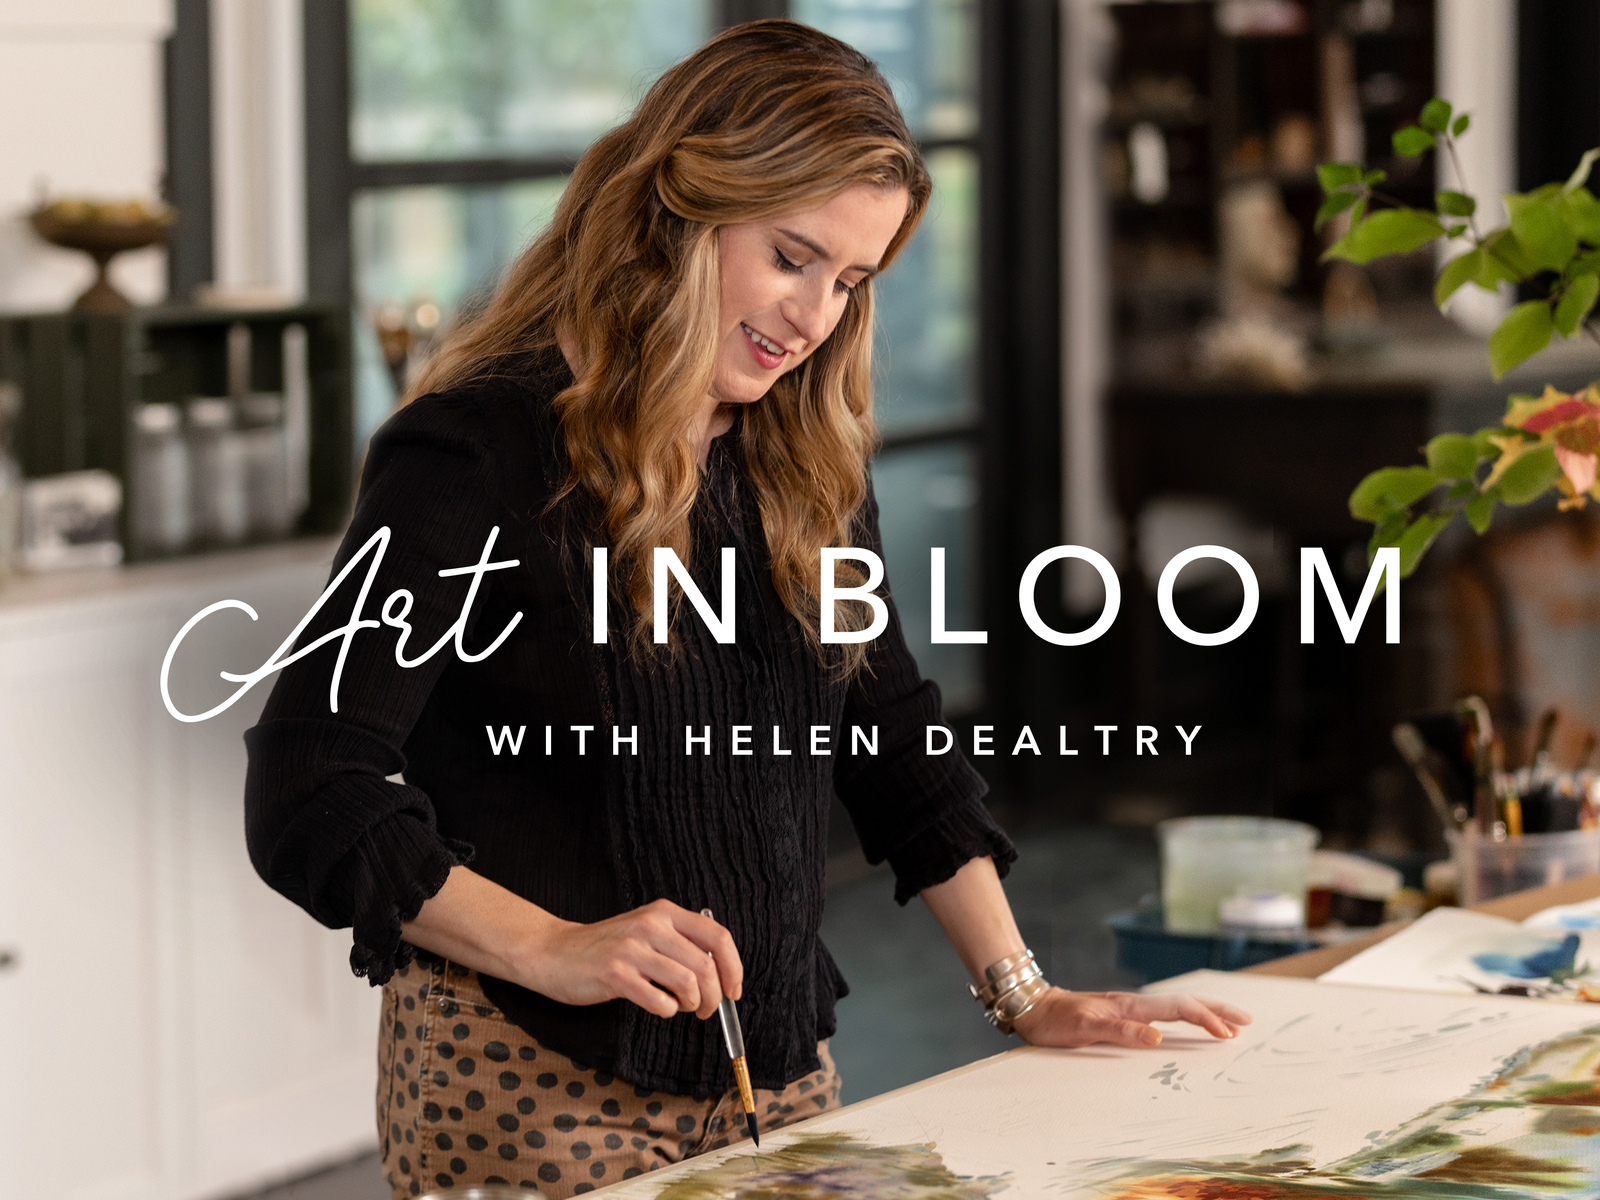 Where to Watch Art in Bloom with Helen Dealtry?